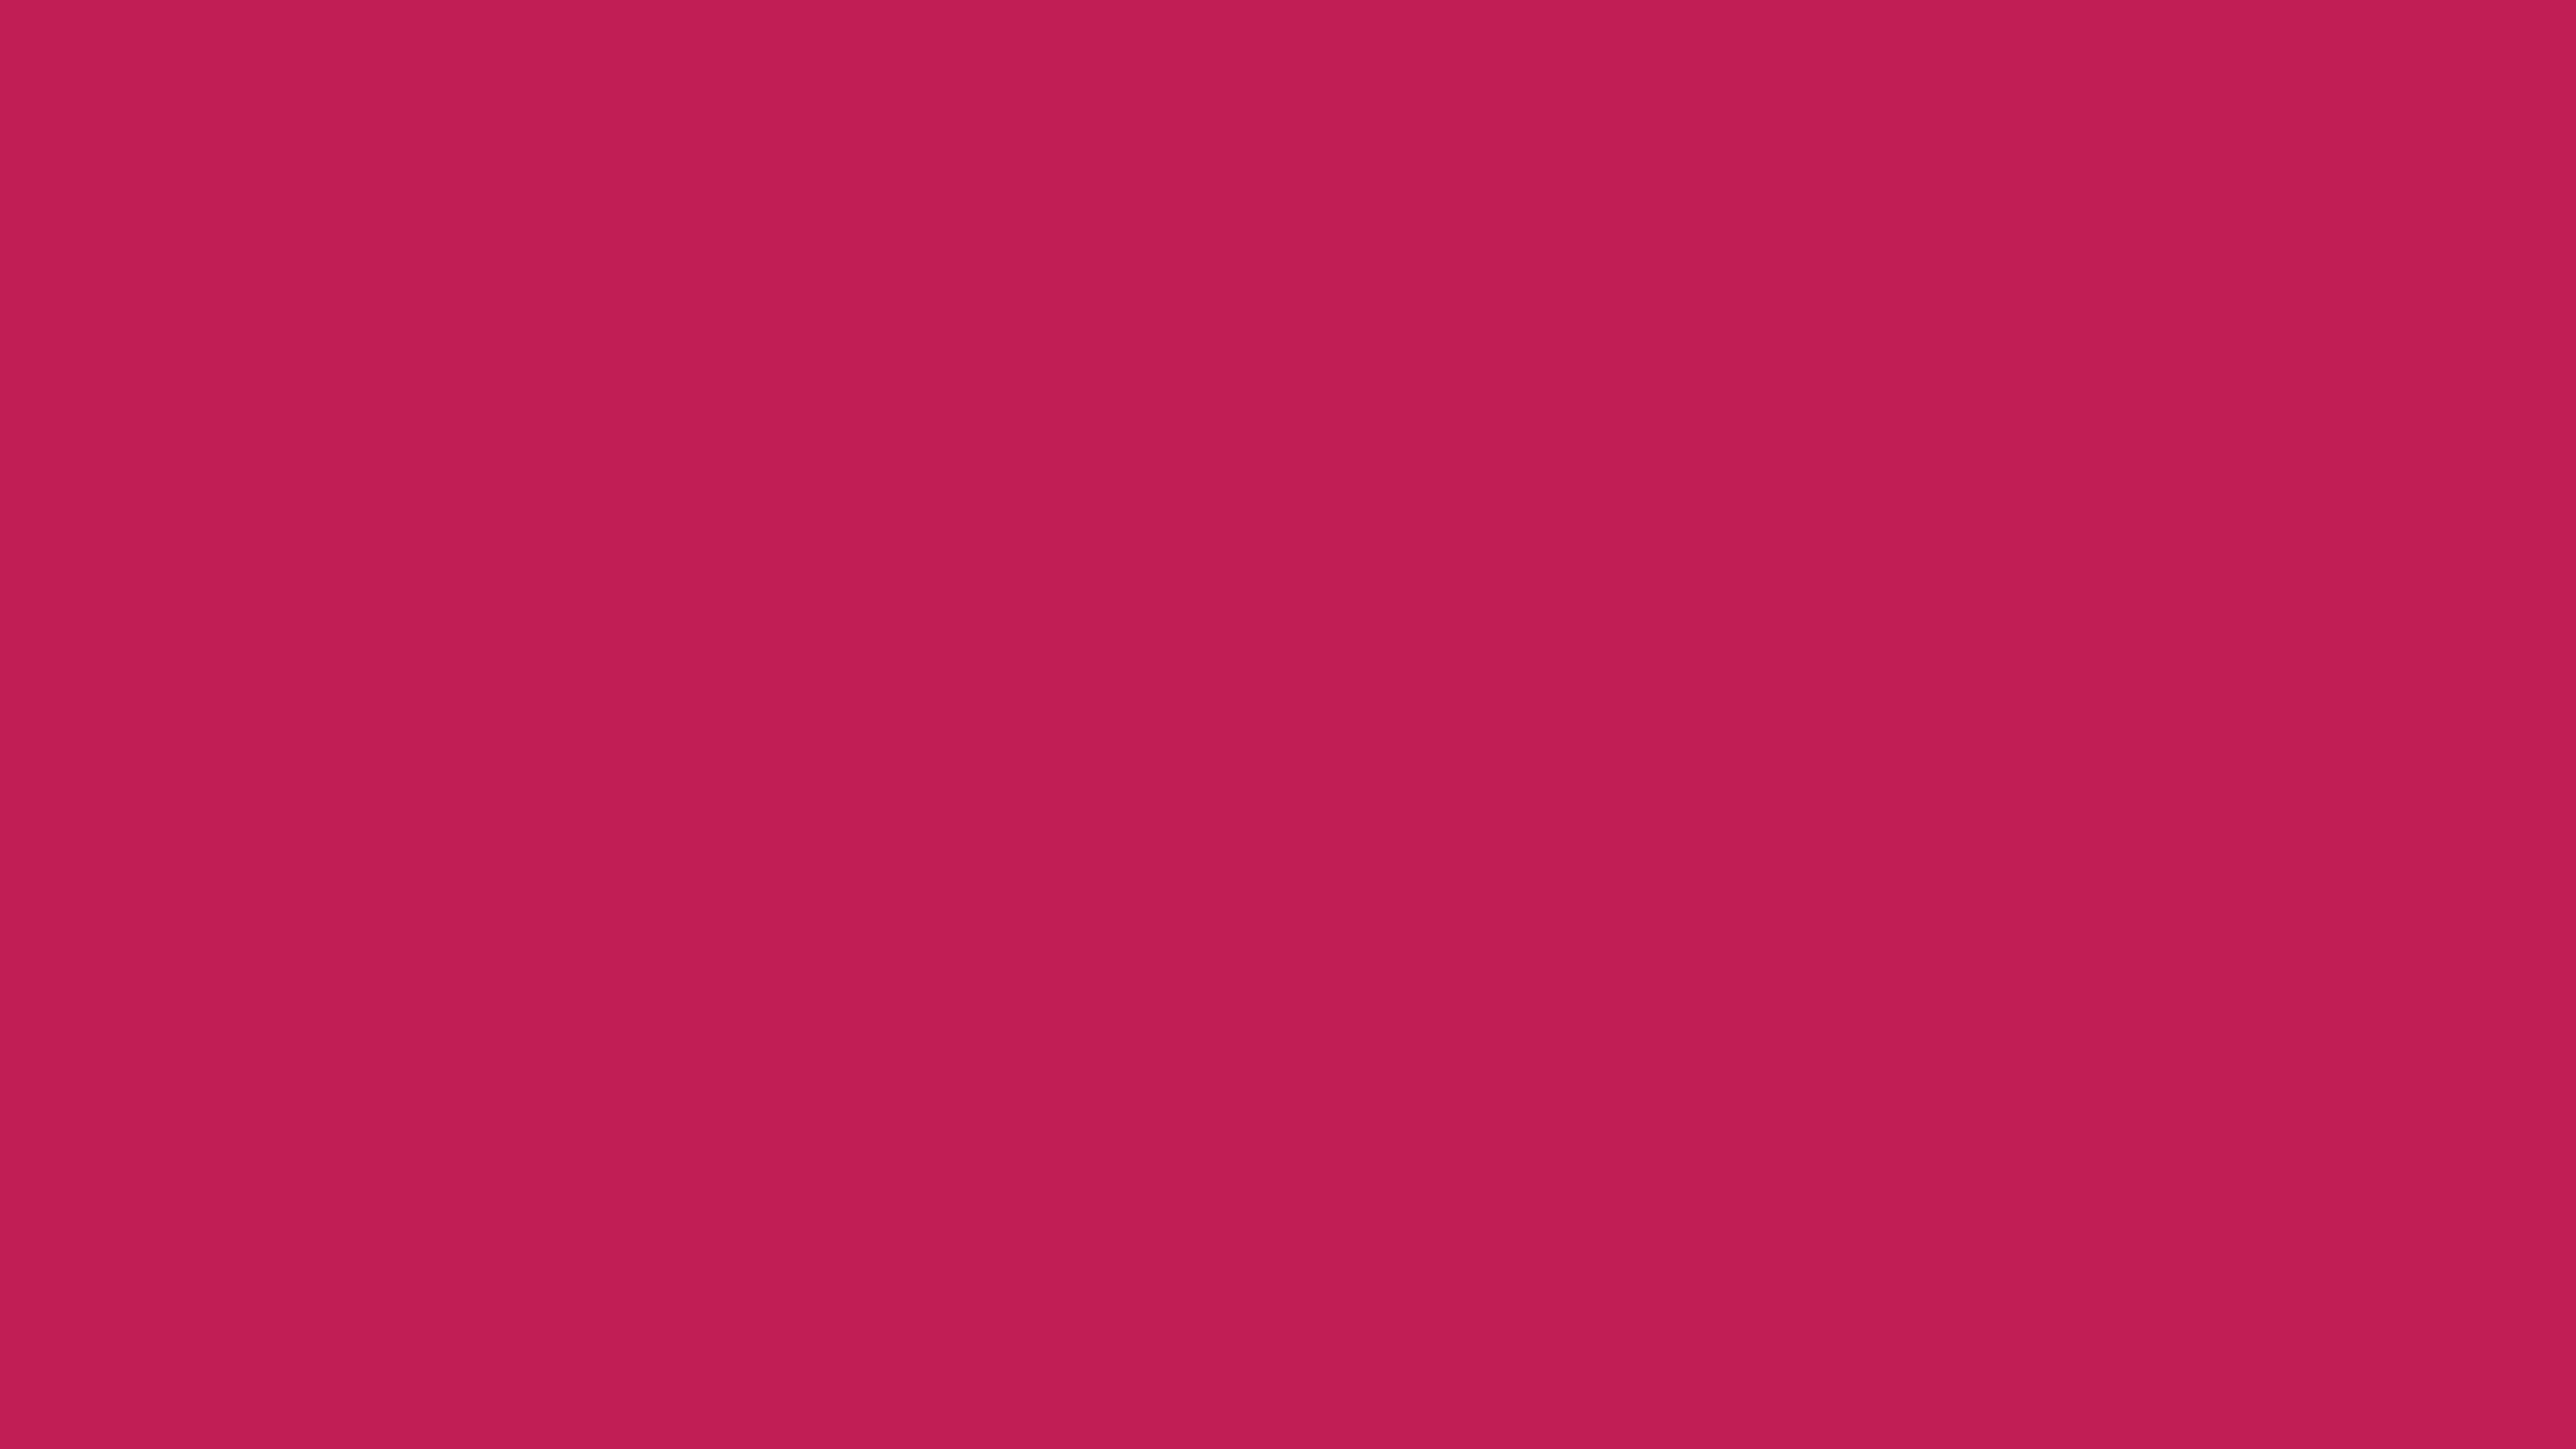 4096x2304 Rose Red Solid Color Background